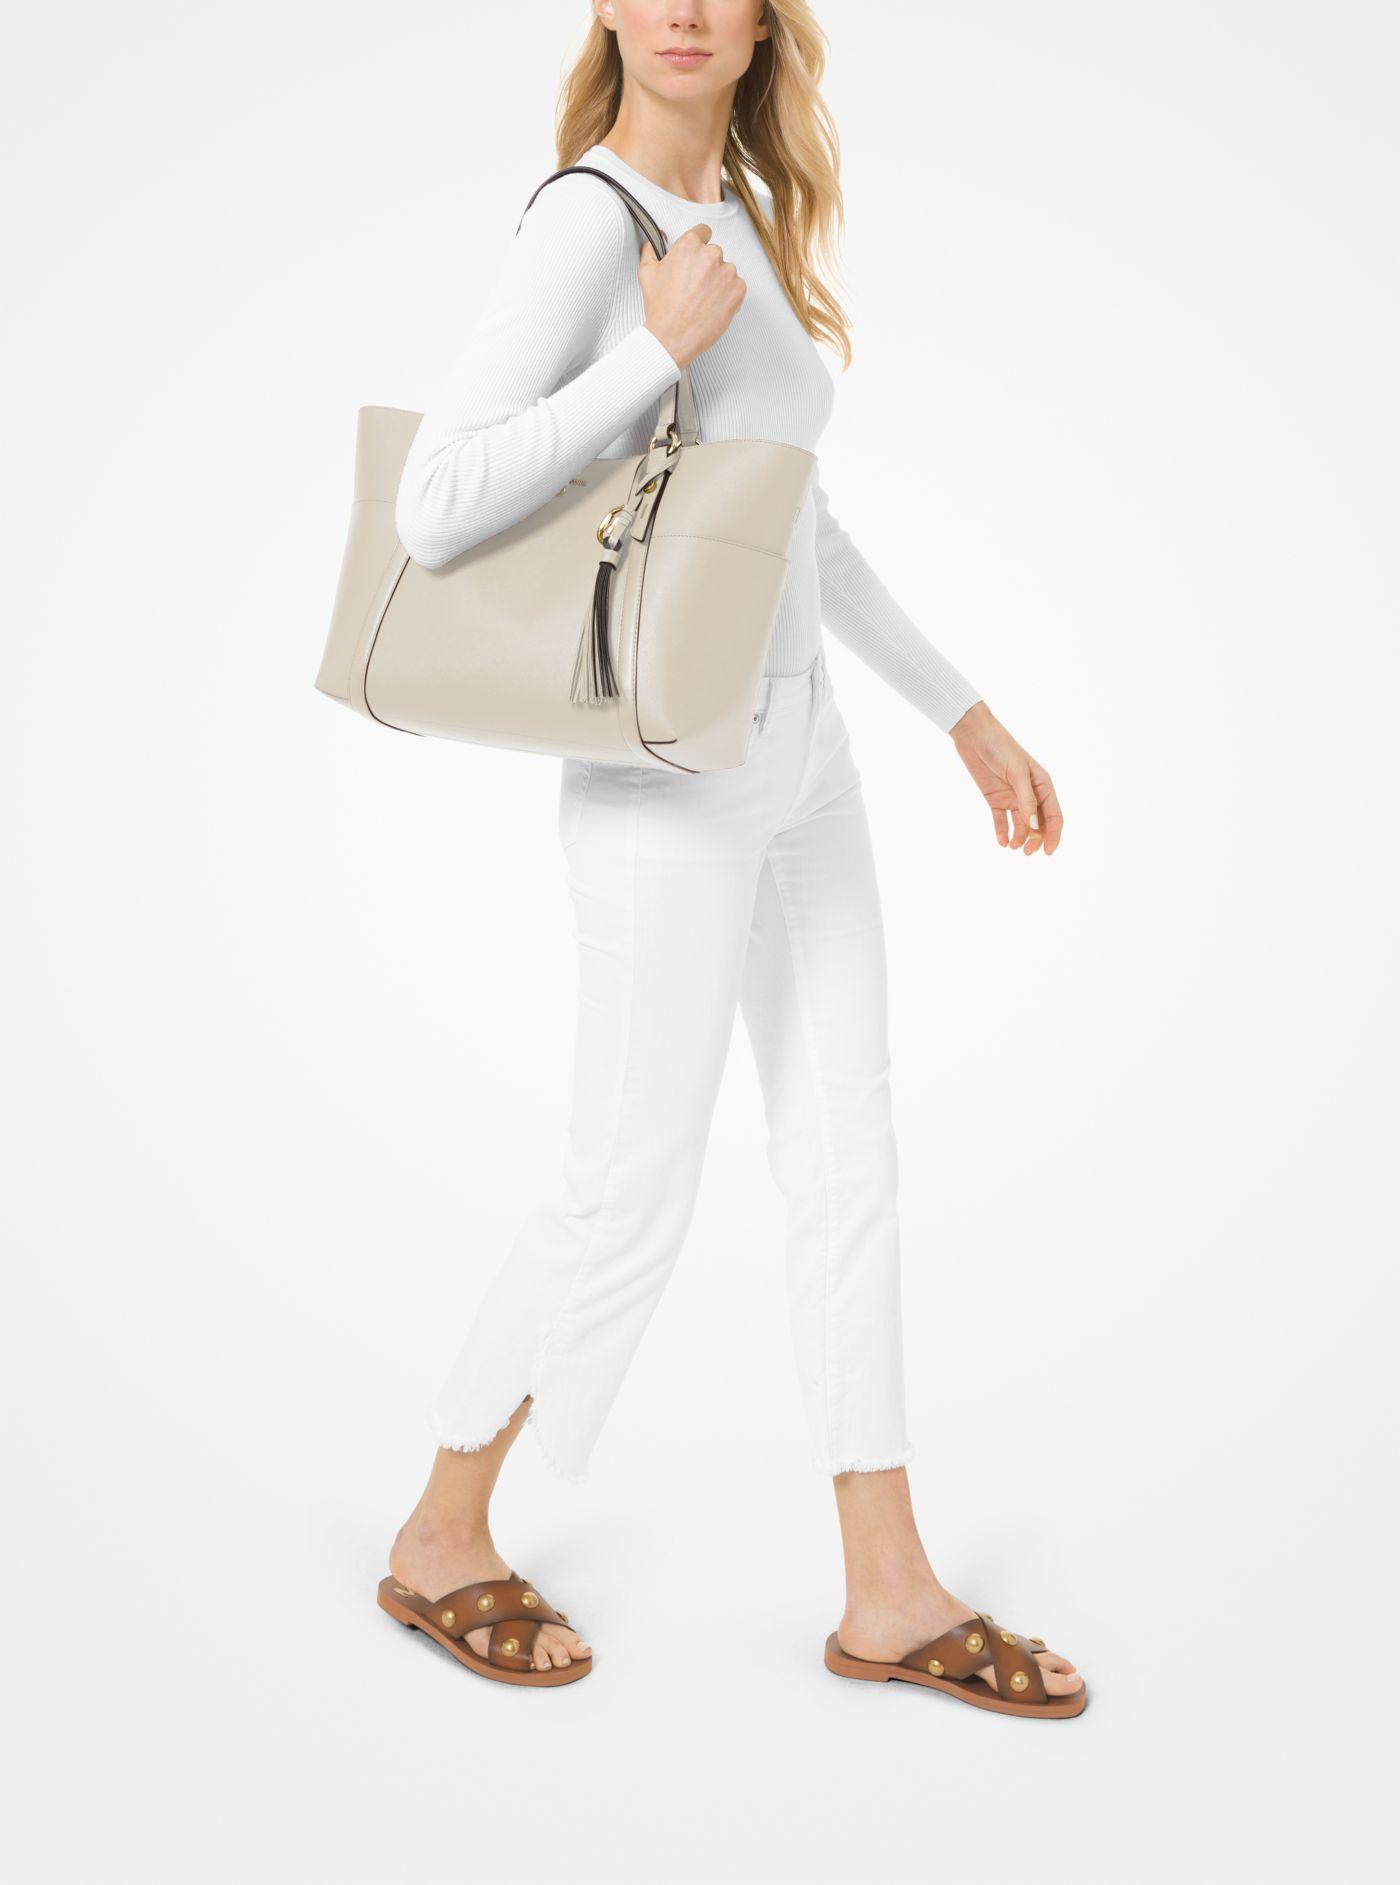 MICHAEL Michael Kors Sullivan Large Saffiano Leather Tote Bag in Natural |  Lyst